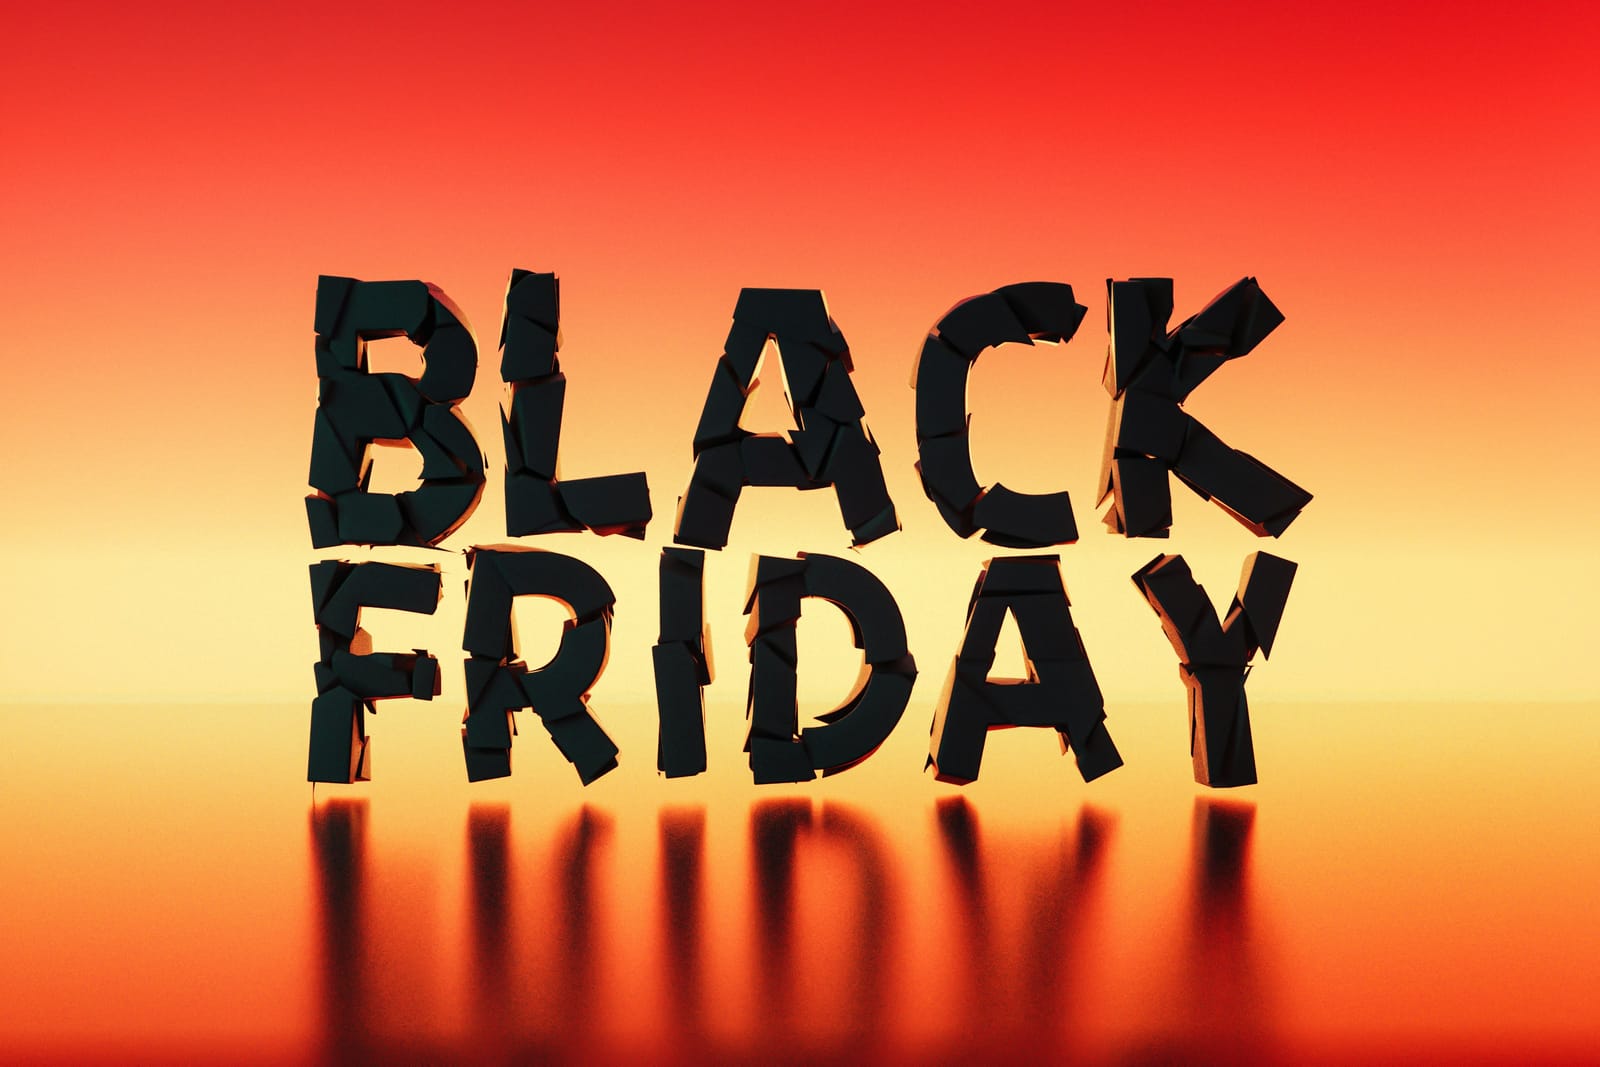 black friday in black letters on red wallpaper background